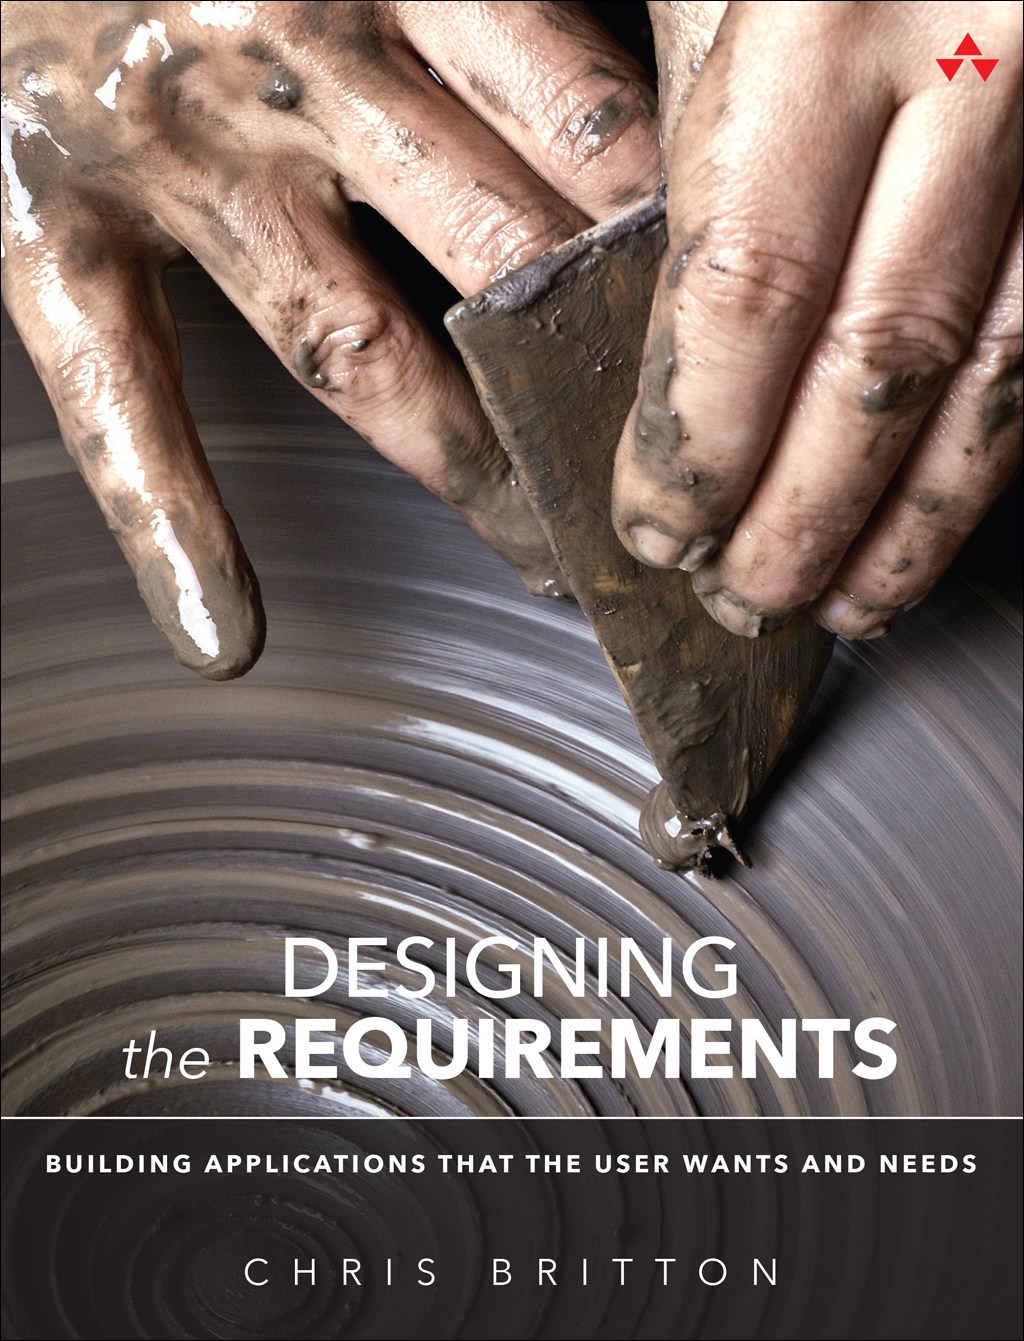 Designing the Requirements: Building Applications that the User Wants and Needs